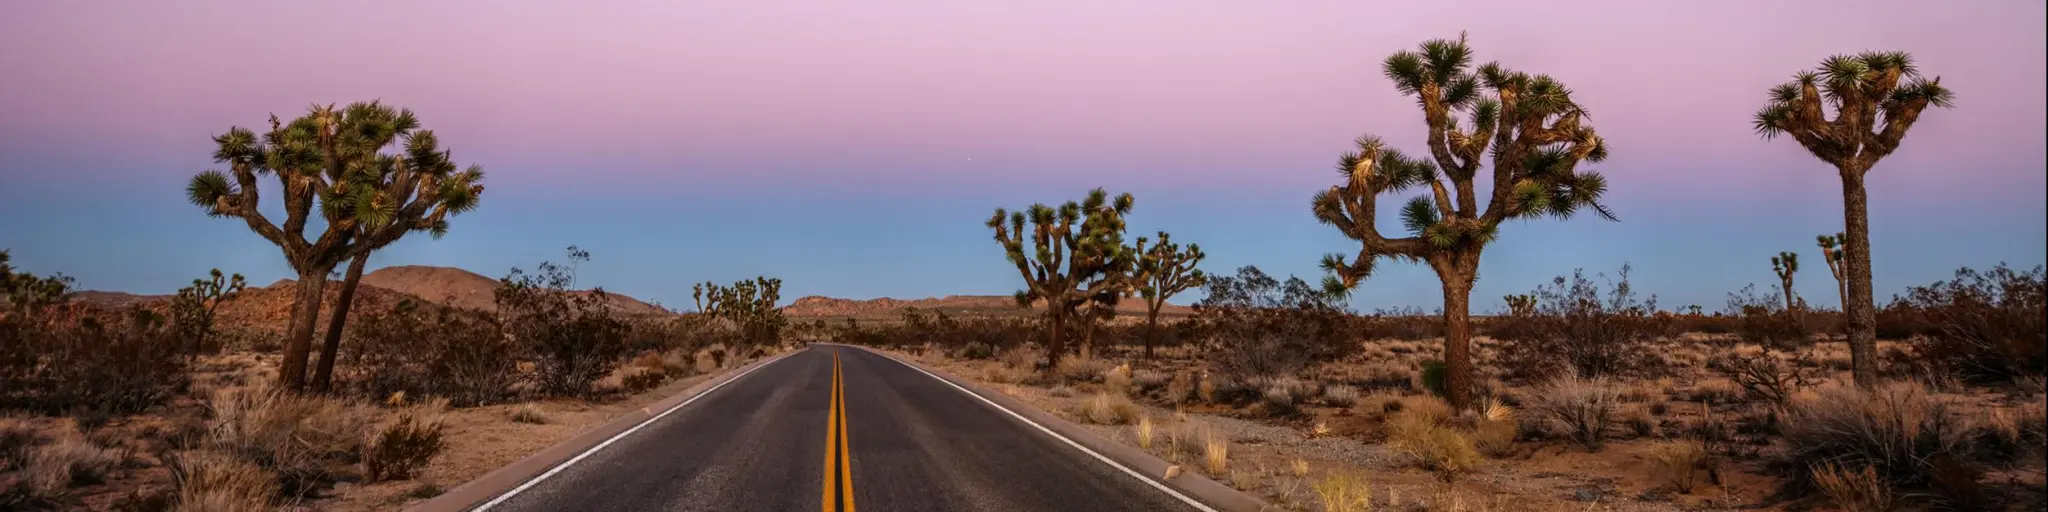 Road driving through the desert near Joshua Tree National Park in California at sunset, with a purple sky